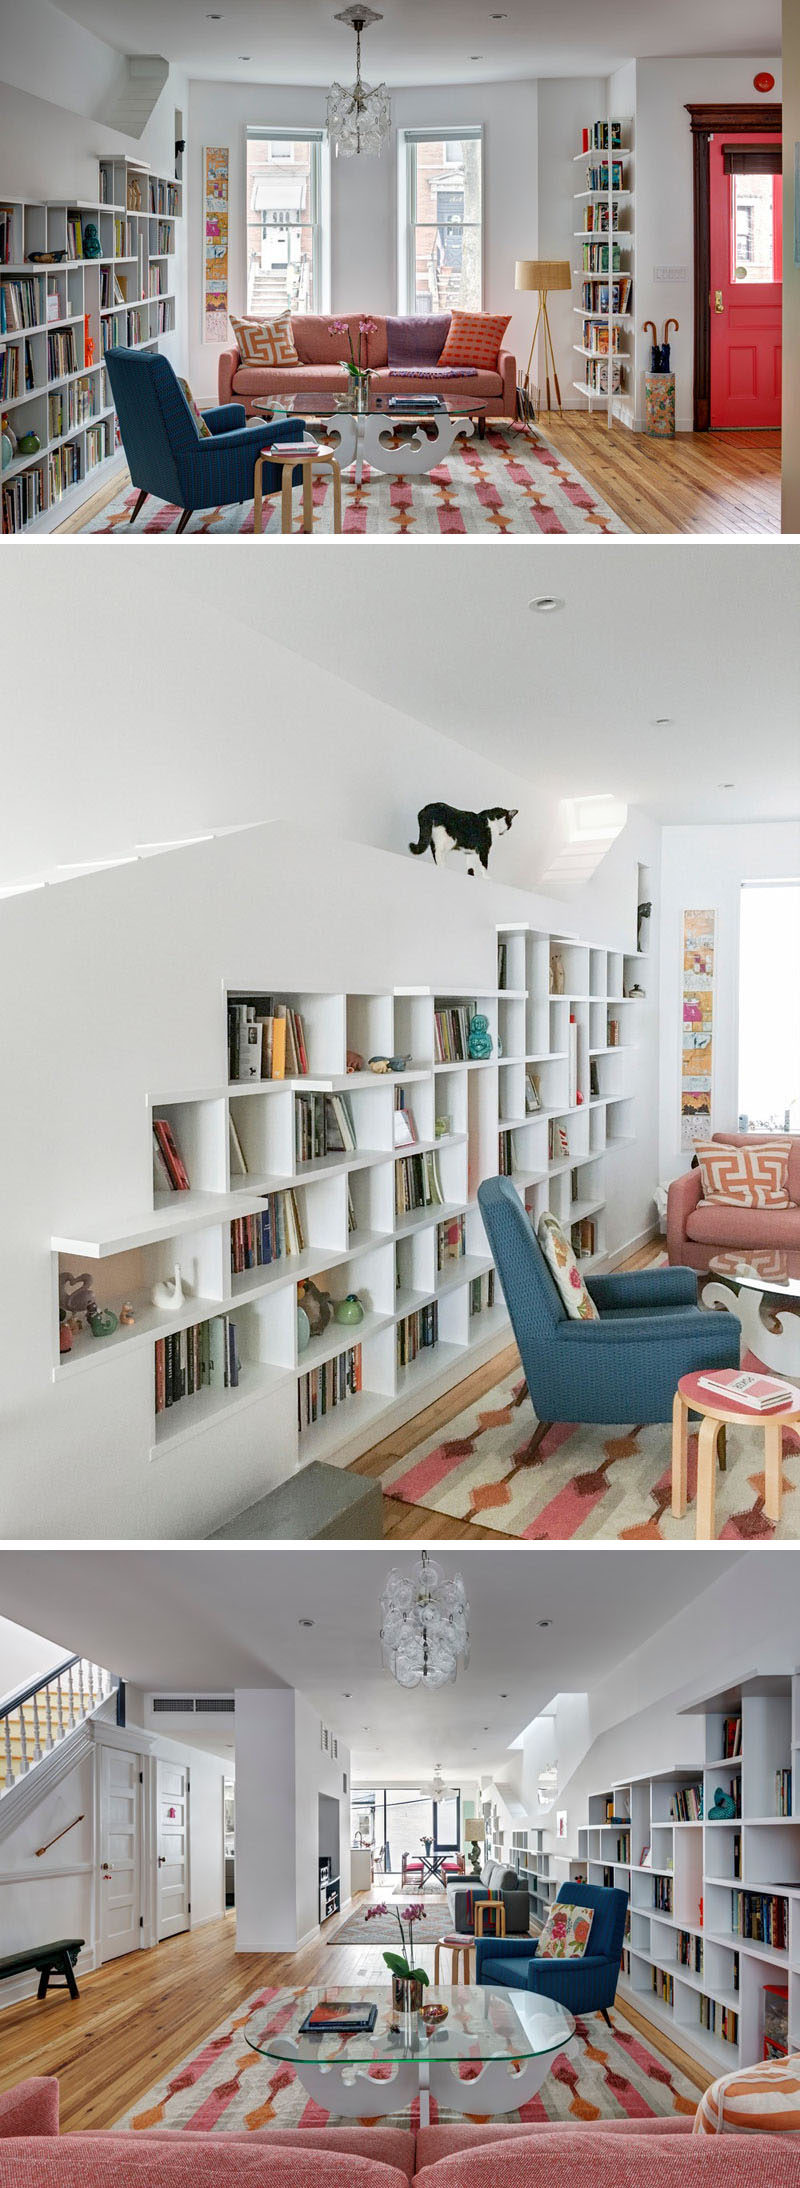 This renovated row house in Brooklyn has a custom built-in bookcase that runs the entire length of the home and it was specifically designed to allow the home owner's cats to climb it and have space to explore. #Cats #InteriorDesign #Shelving #Bookshelf #Bookcase